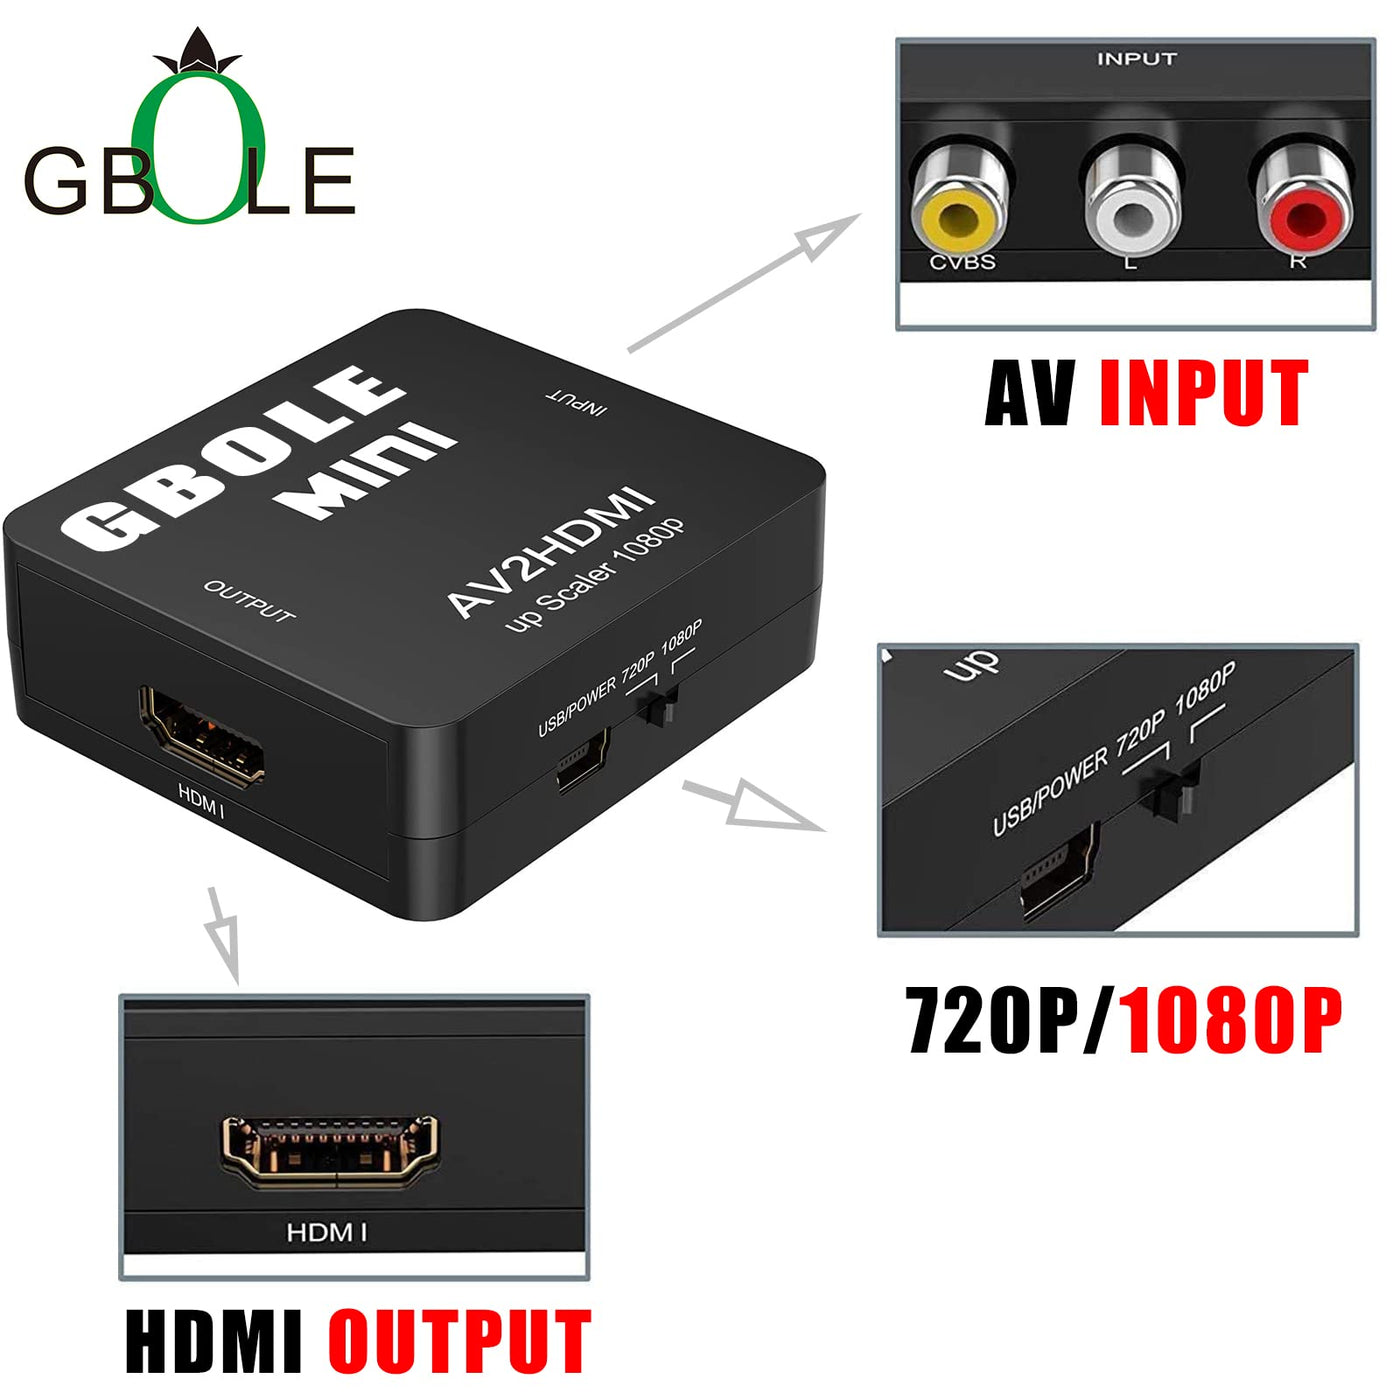 GBOLE RCA to HDMI AV to HDMI Converter 1080P Mini RCA Composite CVBS AV to HDMI  Video Audio Converter Adapter Supporting PAL NTSC with USB Charge Cable for  PC Laptop Xbox PS4